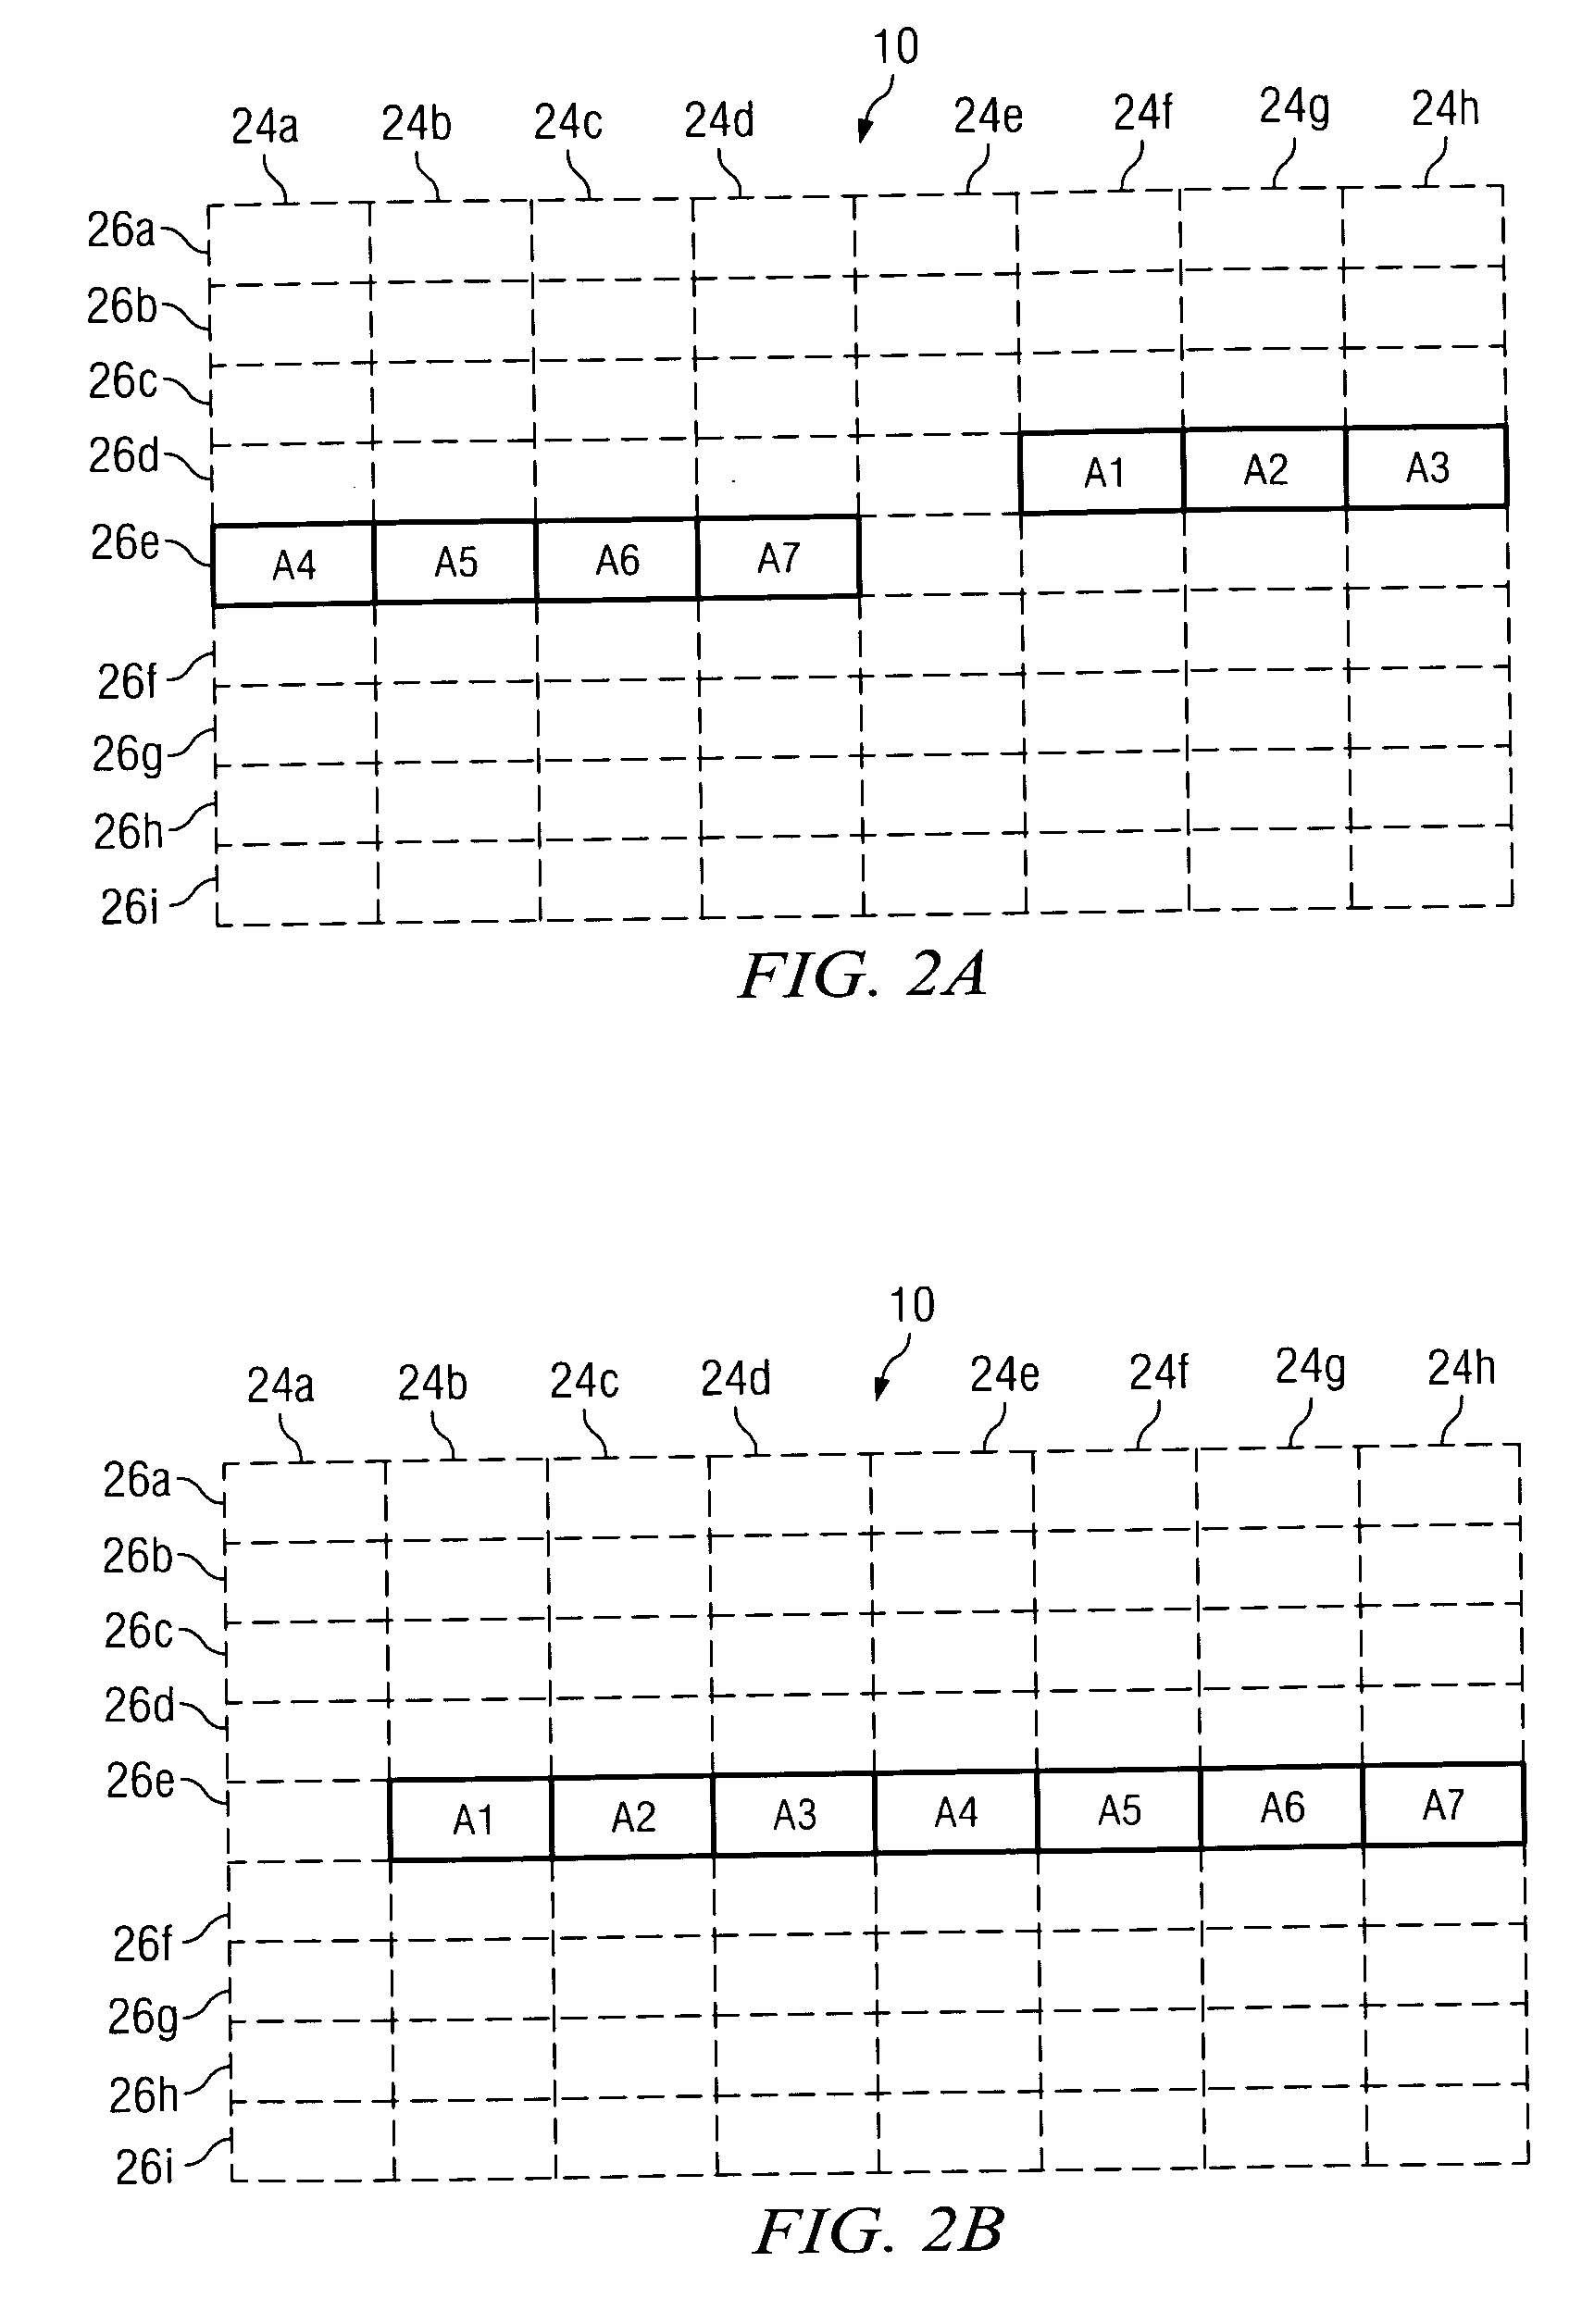 Reducing power consumption at a cache